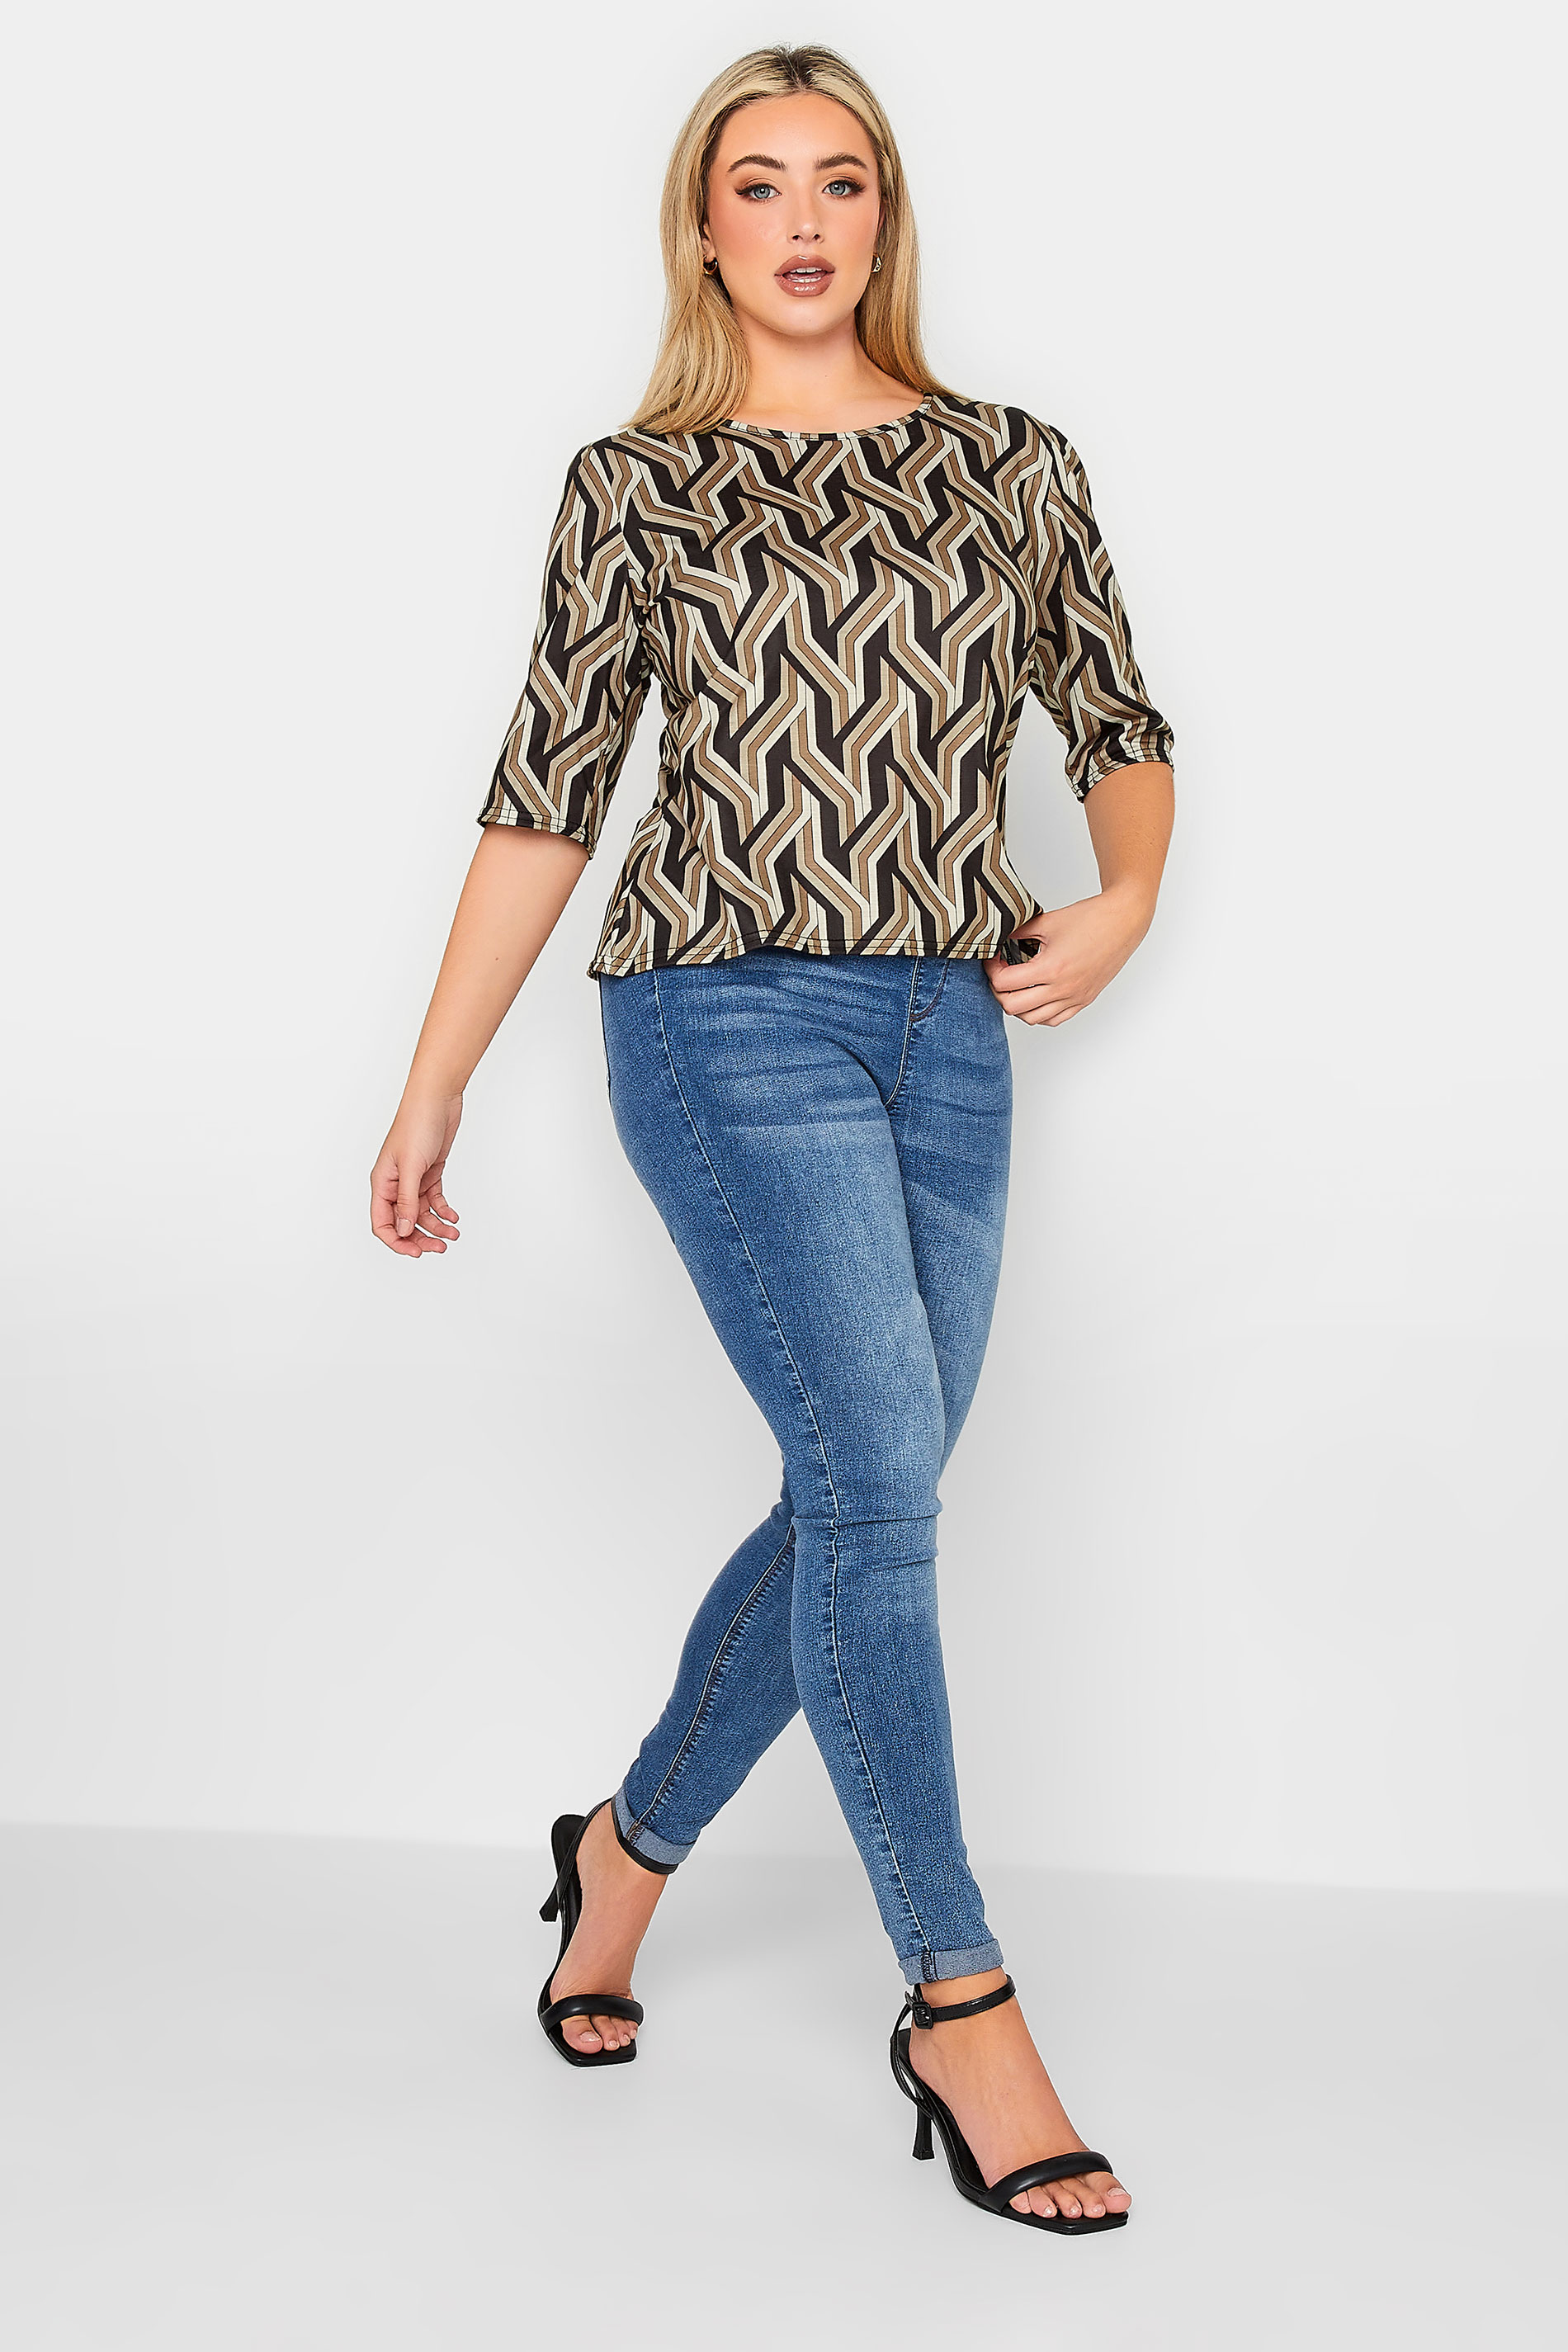 YOURS PETITE Plus Size Brown & Black Geometric Print T-Shirt | Yours Clothing 2